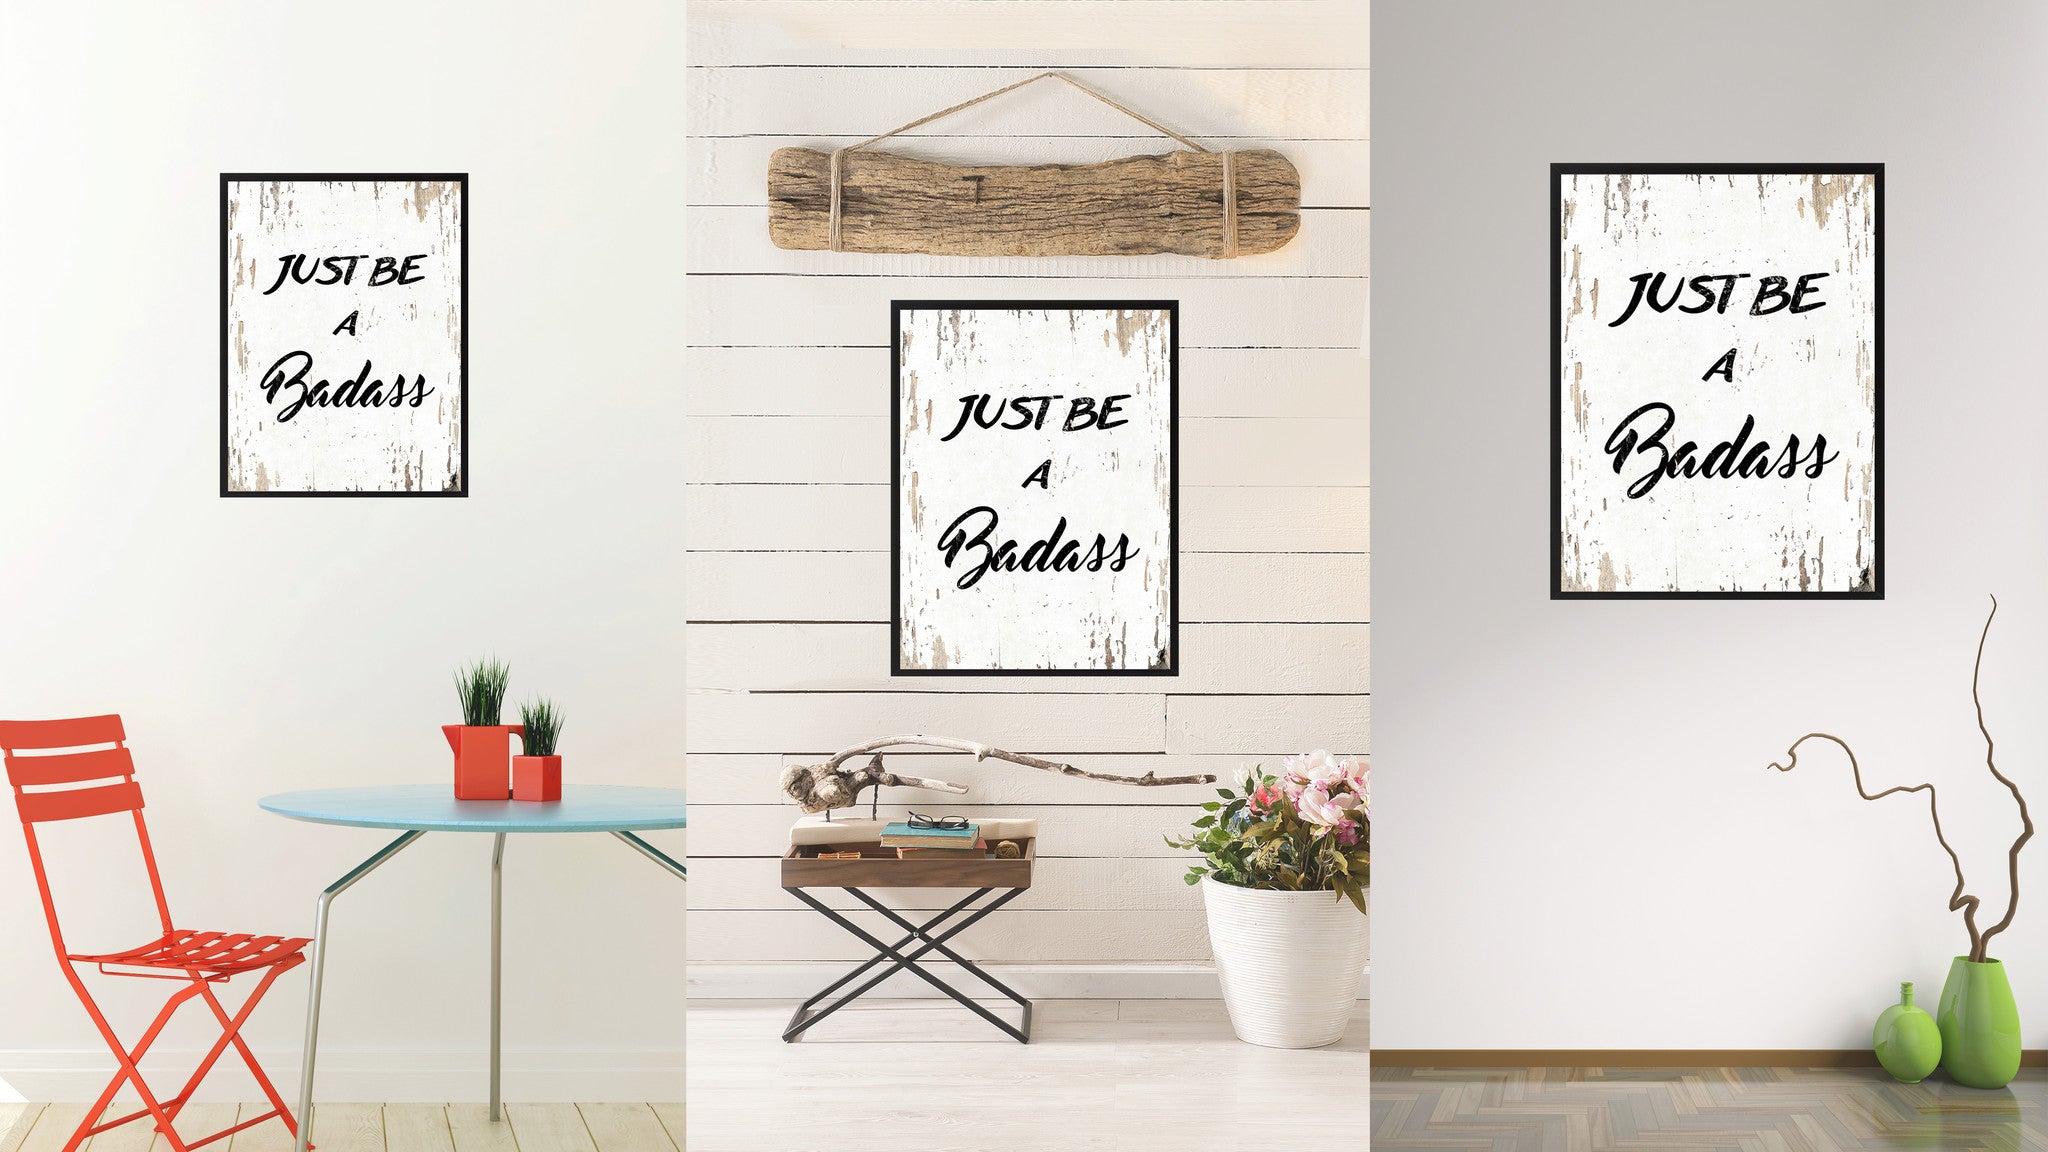 Just be a bada?s Adult Quote Saying Gift Ideas Home Decor Wall Art